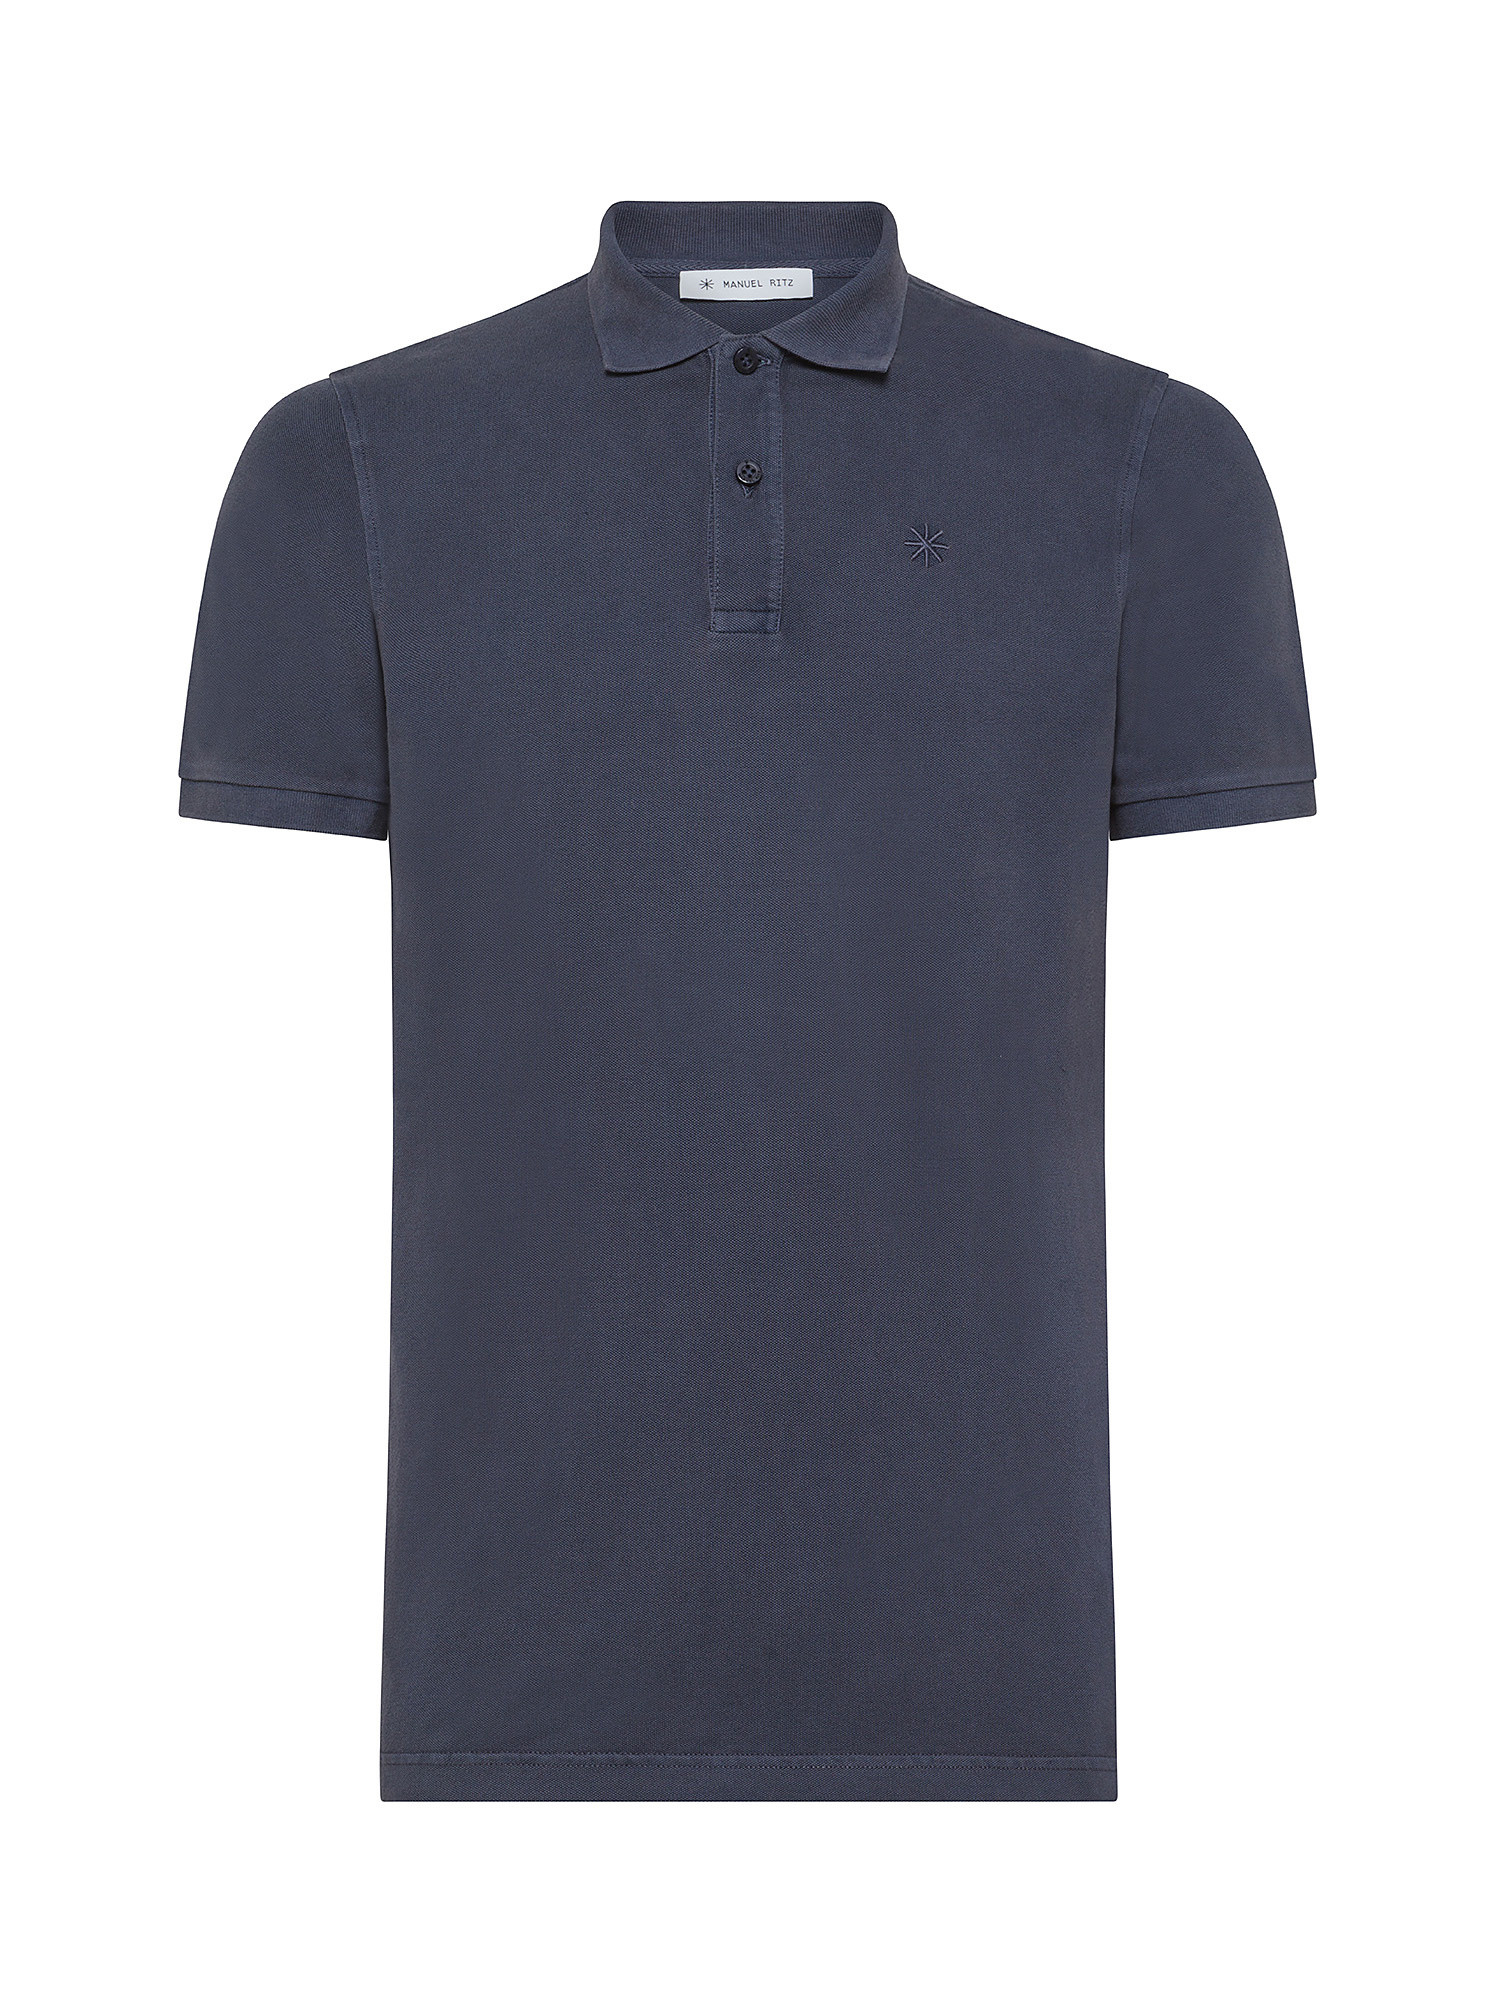 Manuel Ritz - Garment-dyed polo shirt in stretch cotton with logo, Dark Blue, large image number 0